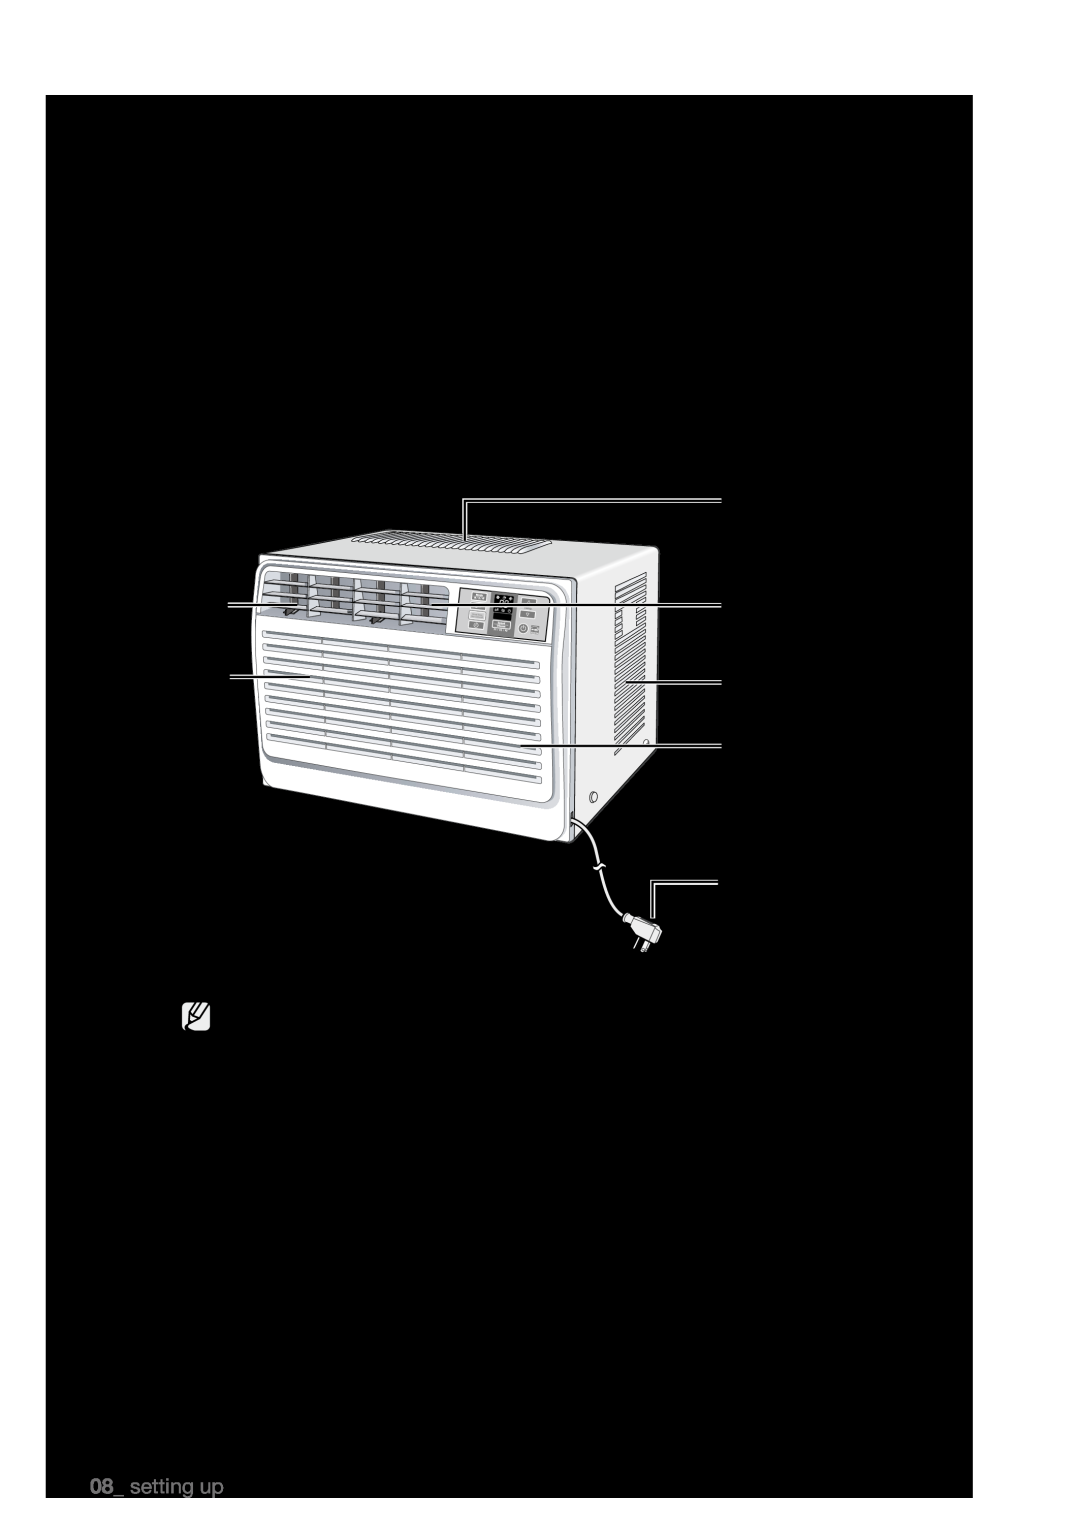 Samsung AW06EDB Series setting up your air conditioner before use, Checking The Parts And The Control Panel, Main parts 